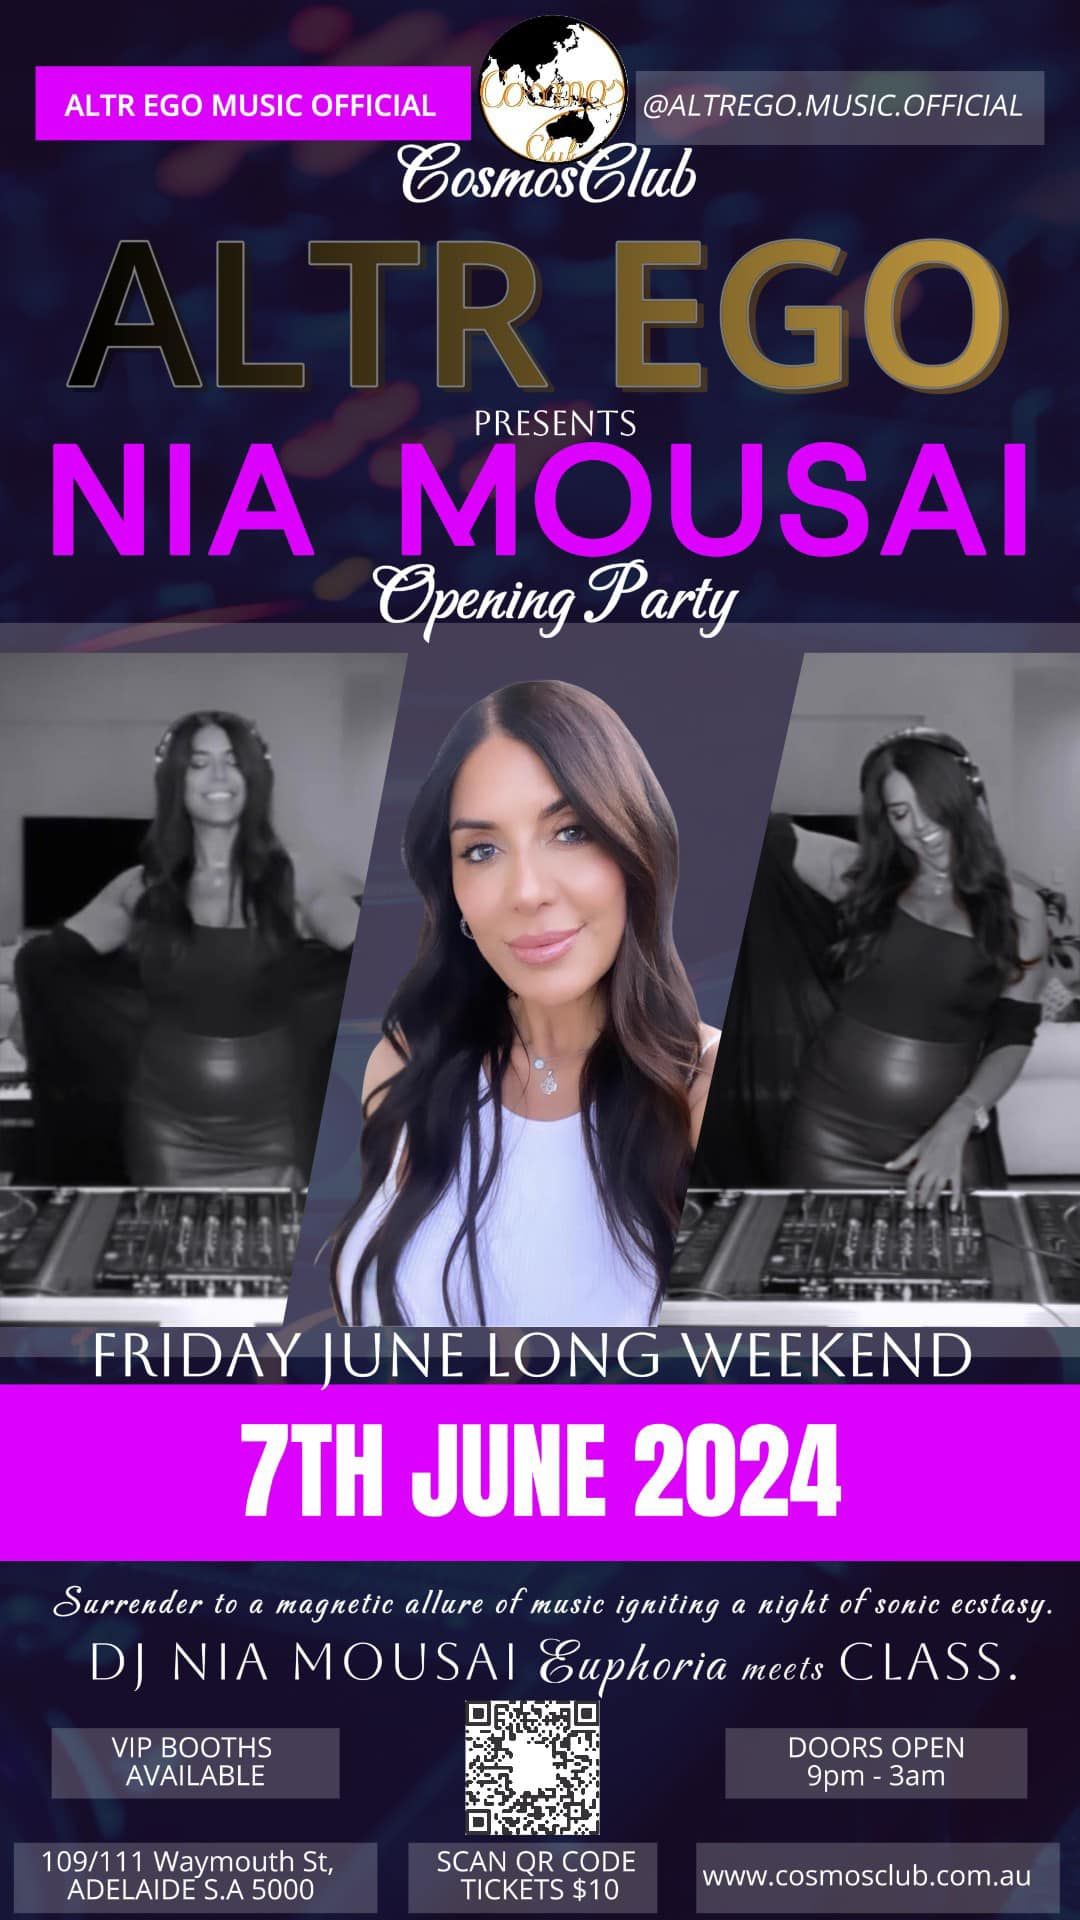 ALTR EGO presents FRIDAY 7th of June long weekend Dj NIA MOUSAI 